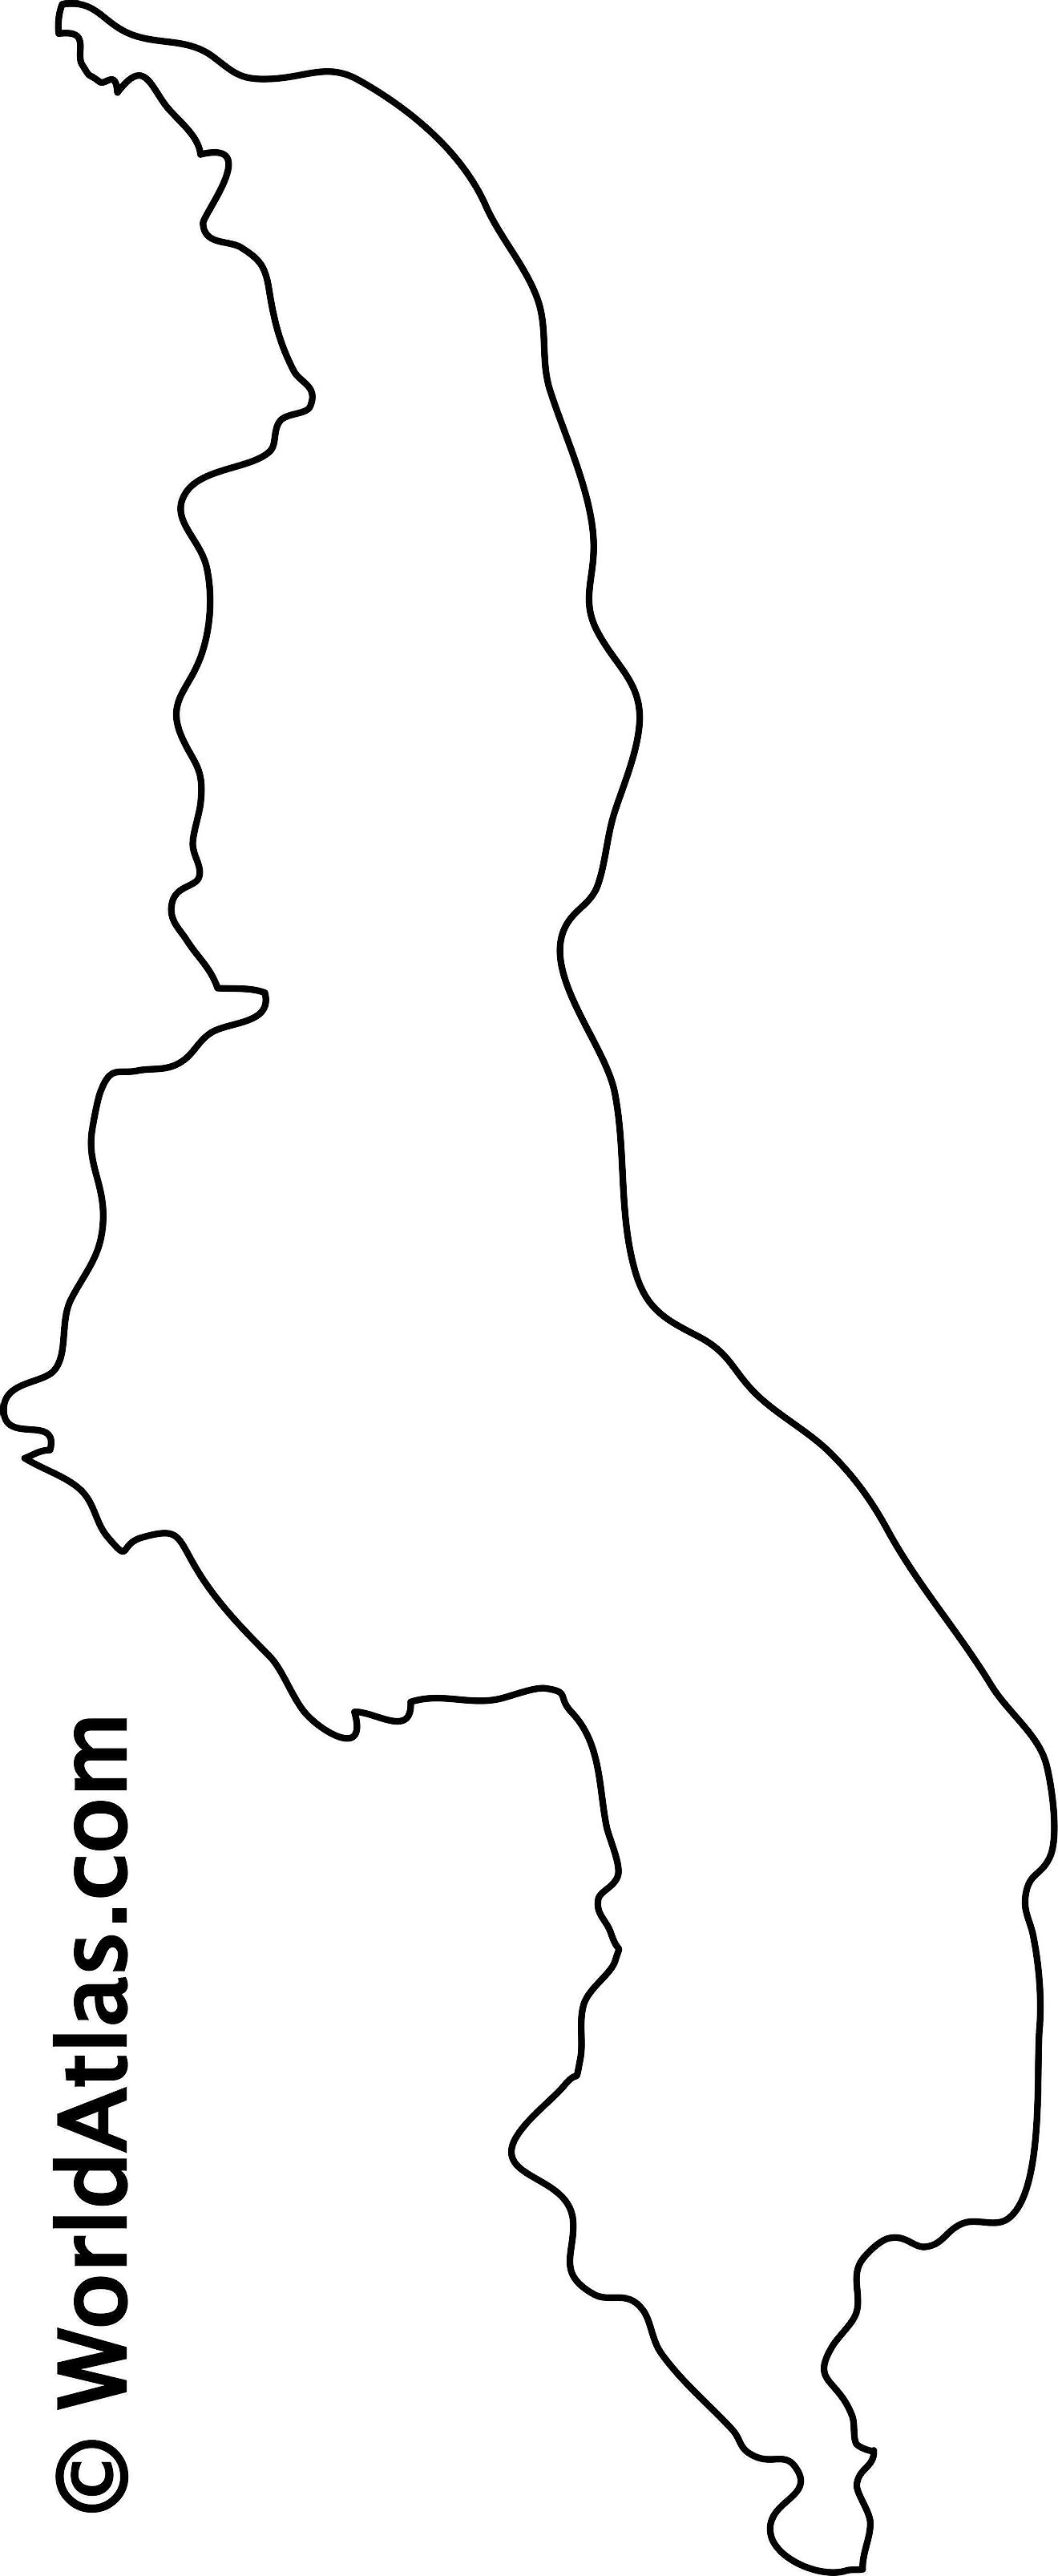 Blank Outline Map of Malawi